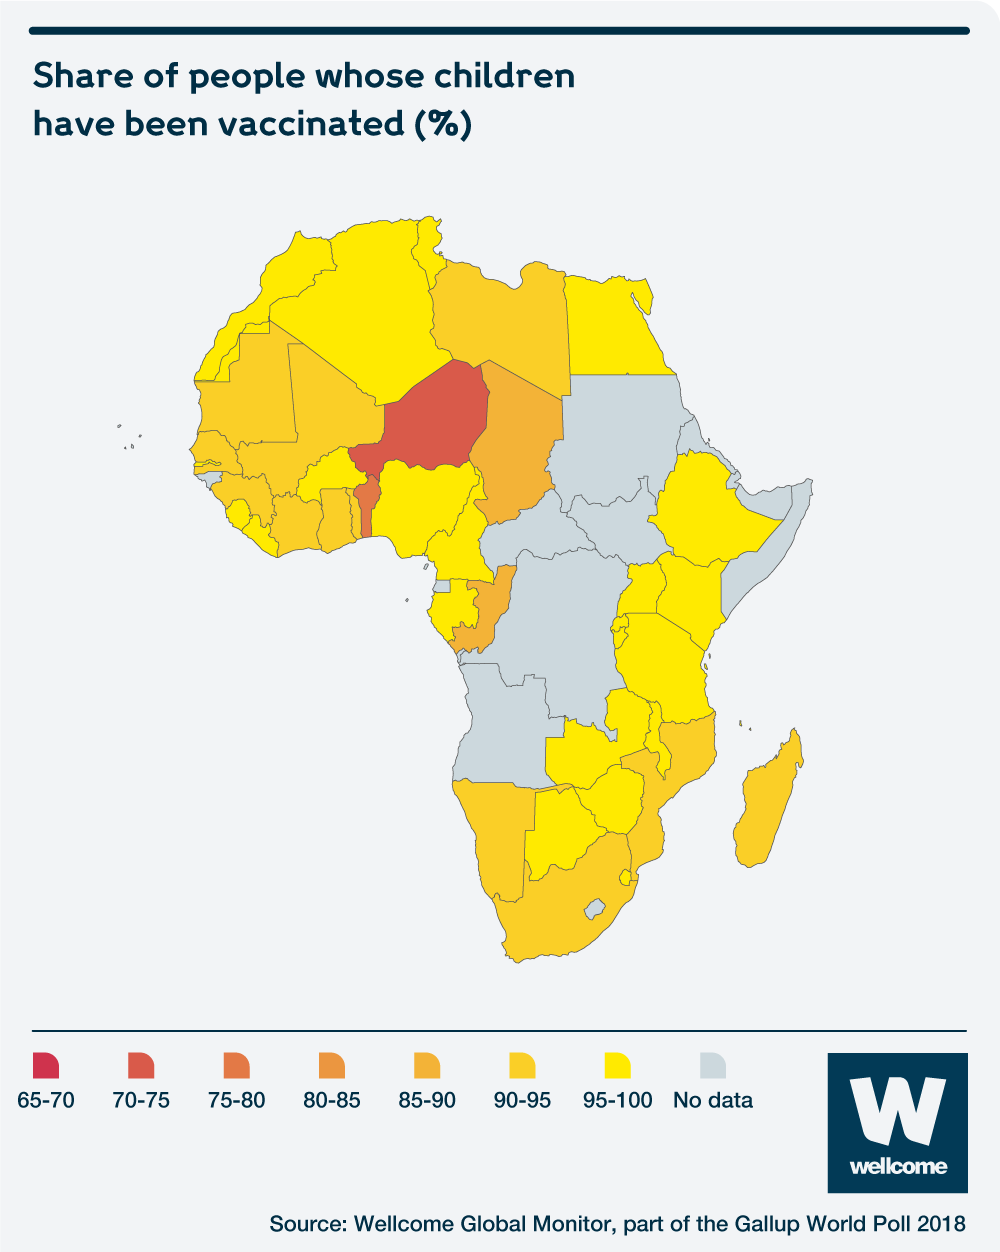 Map showing share of people in different Africa countries whose children have been vaccinated